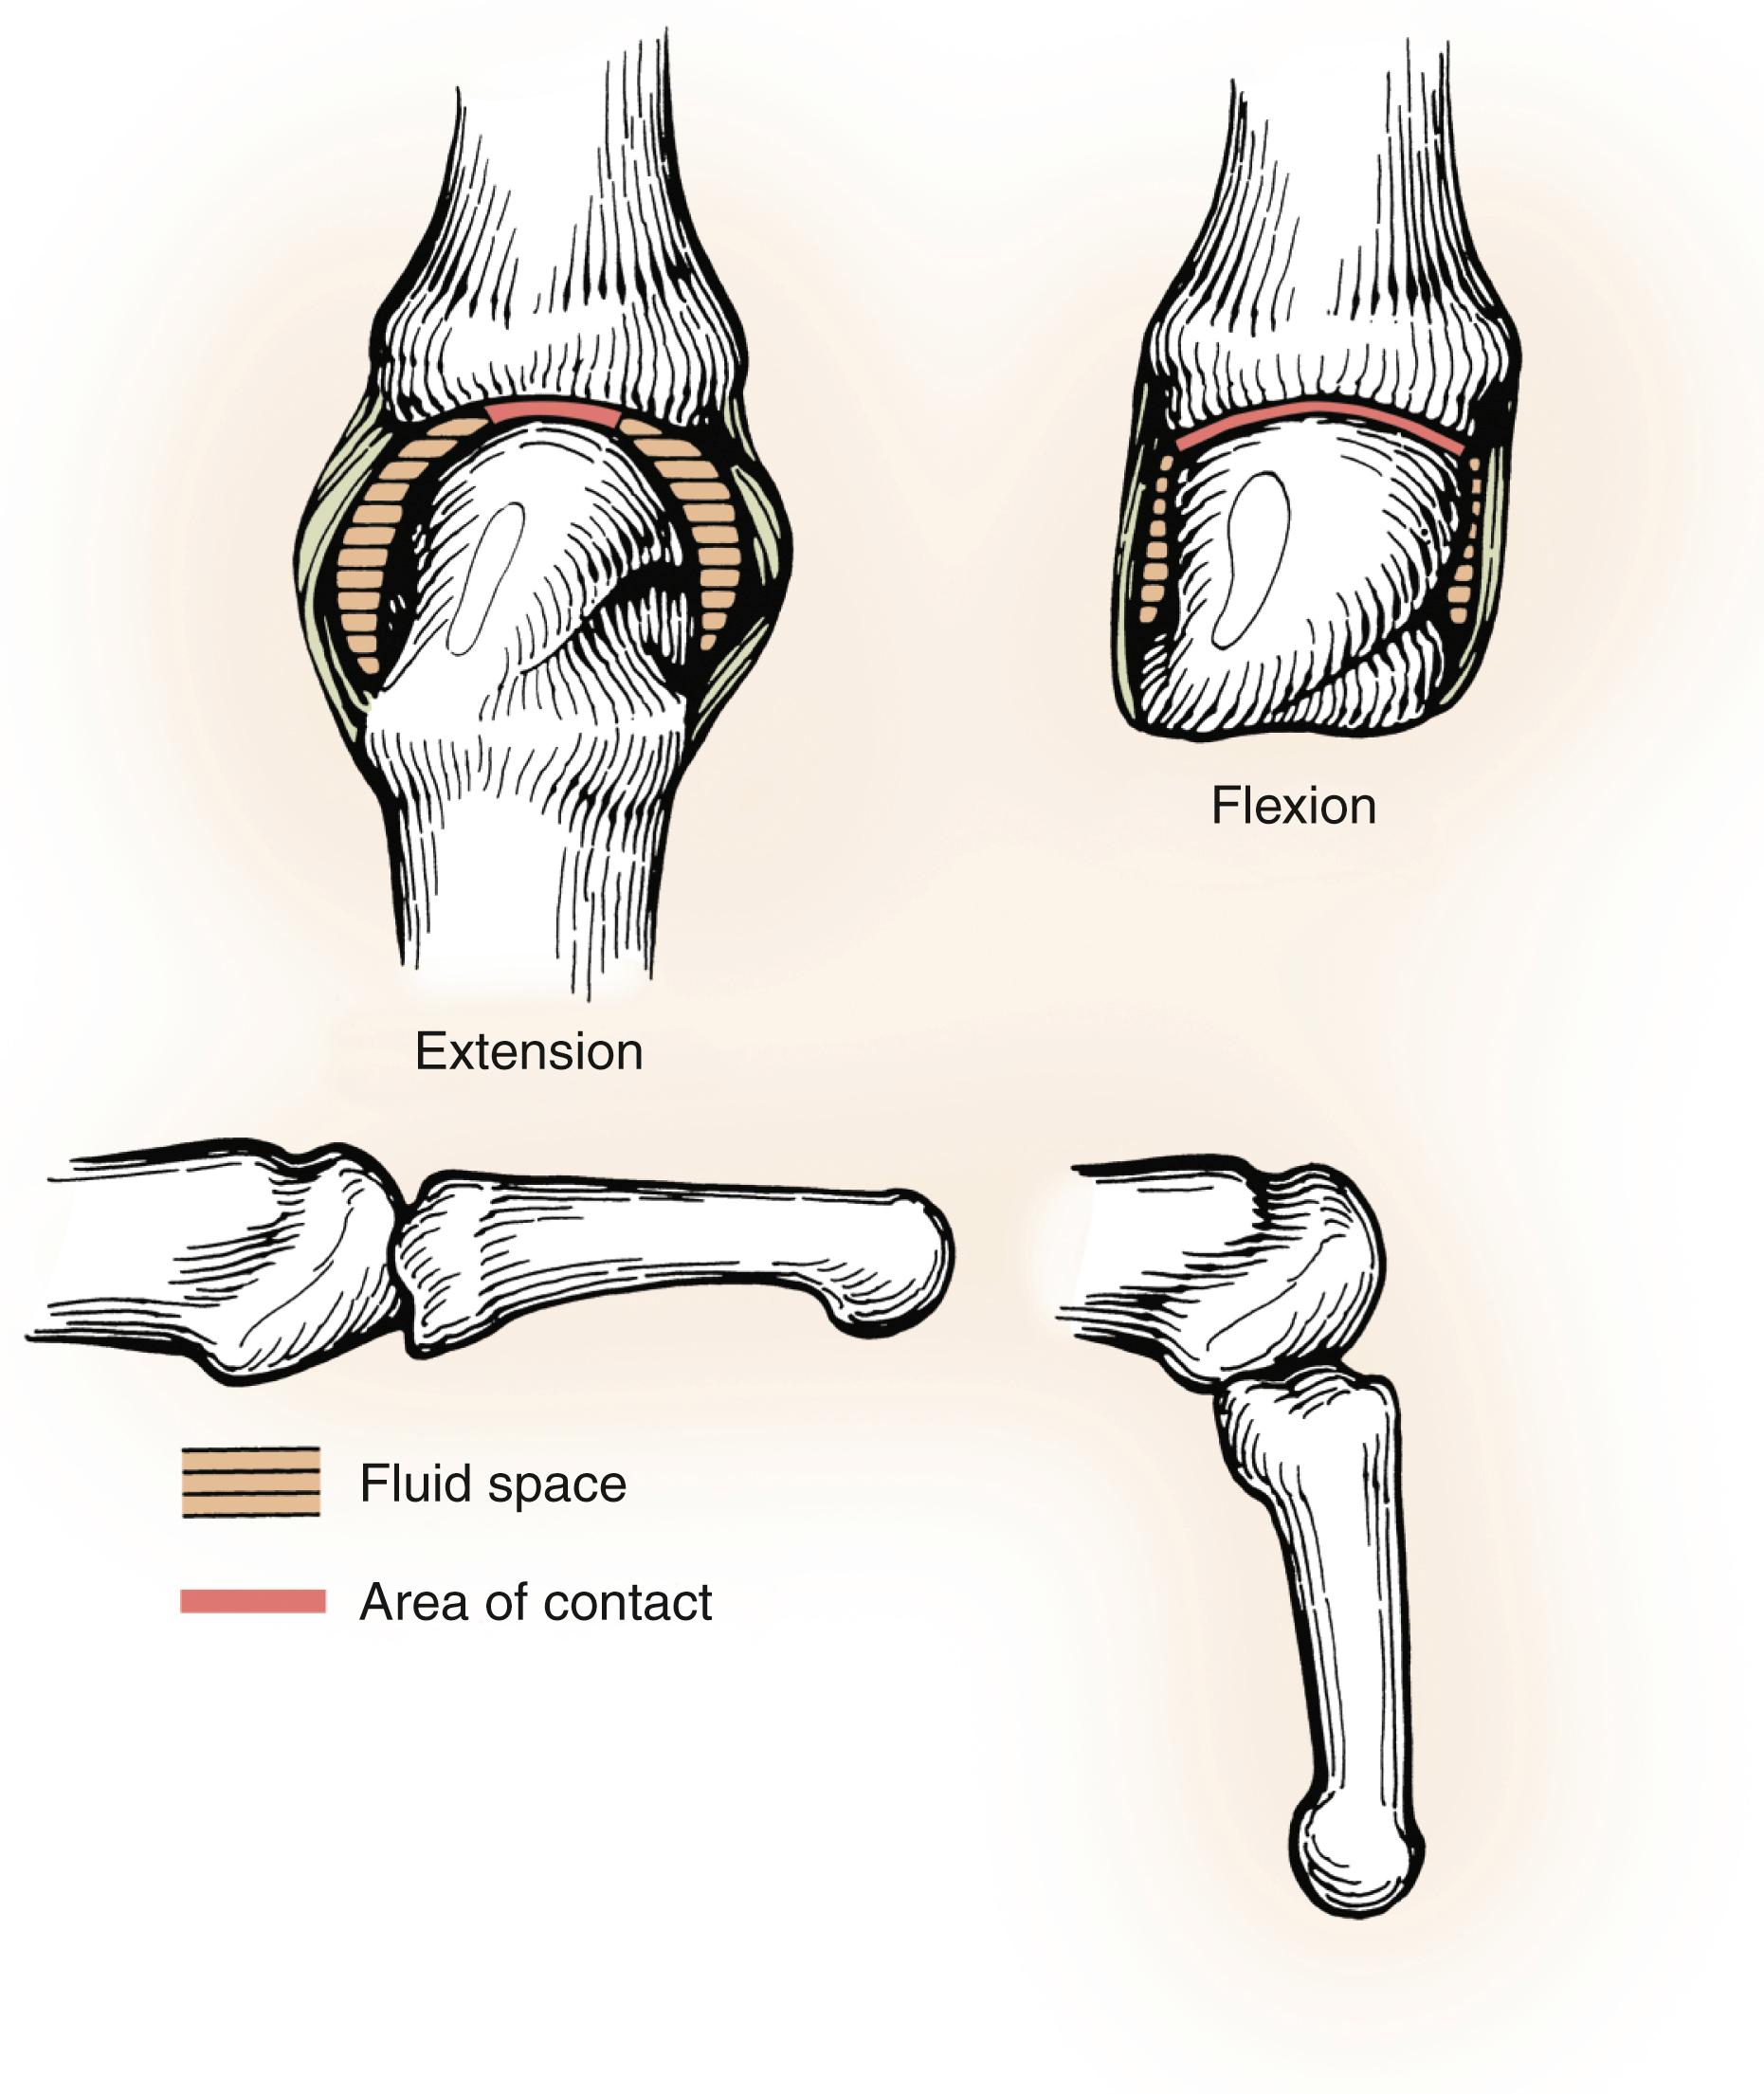 Fig. 10.10, The anatomy of the extended metacarpophalangeal (MP) joint differs from that of the fully flexed MP joint. In extension, the bone contact surface area is minimal. The collateral ligaments are loose, intracapsular fluid space is at a maximum, and the joint is relatively unstable. The proximal phalanx rotates, abducts, and adducts on the metacarpal. In full flexion, the metacarpal condylar surface is broad, and the contact area is maximal between the metacarpal and proximal phalanx. The collateral ligaments are tight secondary to a cam effect and the necessity of the collaterals to pass around the metacarpal head prominences. The intracapsular fluid space is minimal, and the joint is highly stable because of the bone and ligament configurations in the flexed position.